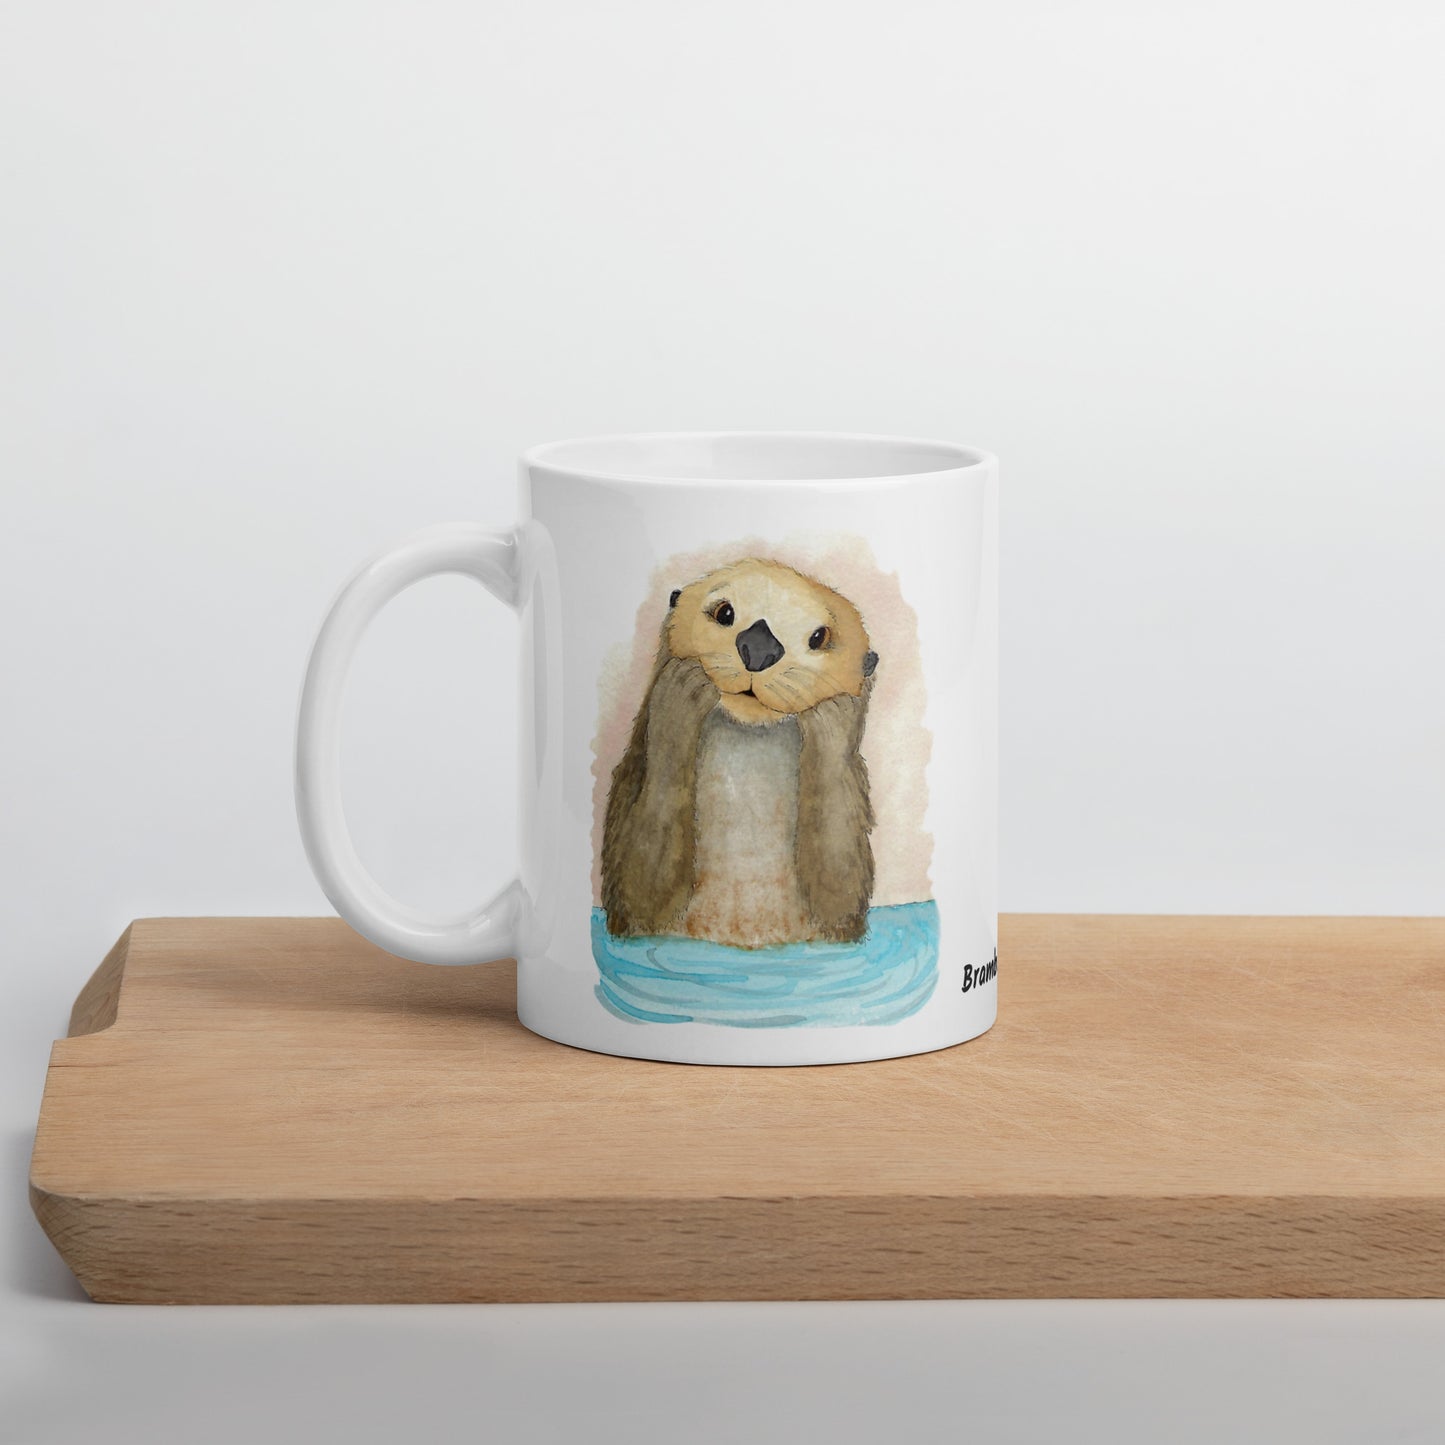 11 ounce white ceramic mug featuring watercolor print of a sea otter on both sides. Dishwasher and microwave safe. Shown on wooden tray.